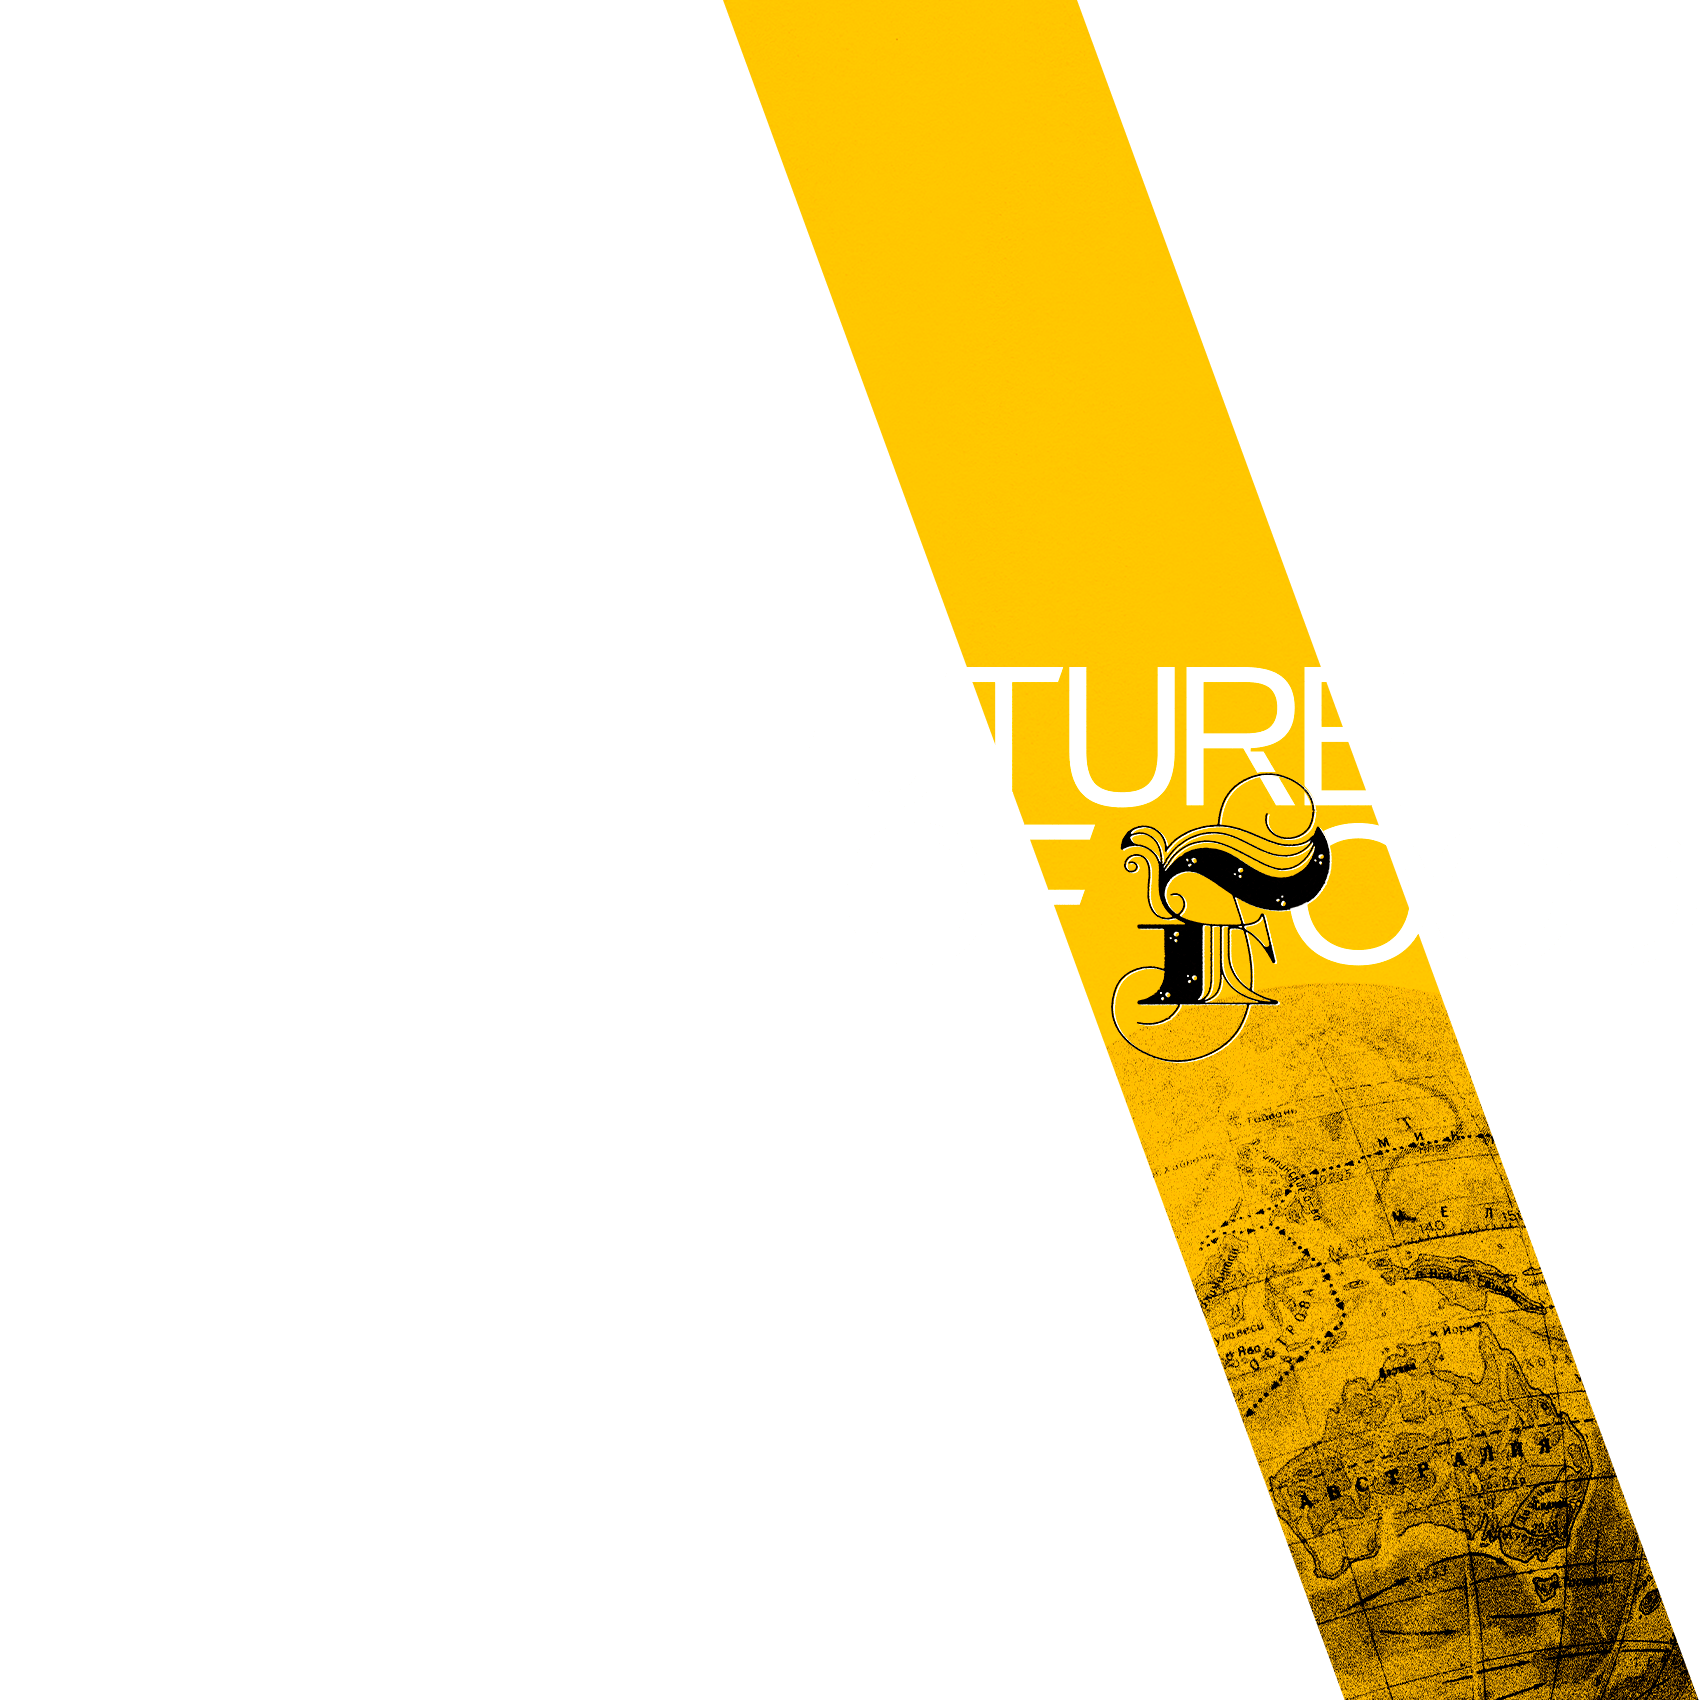 yellow backslash that reads "Future of Food"